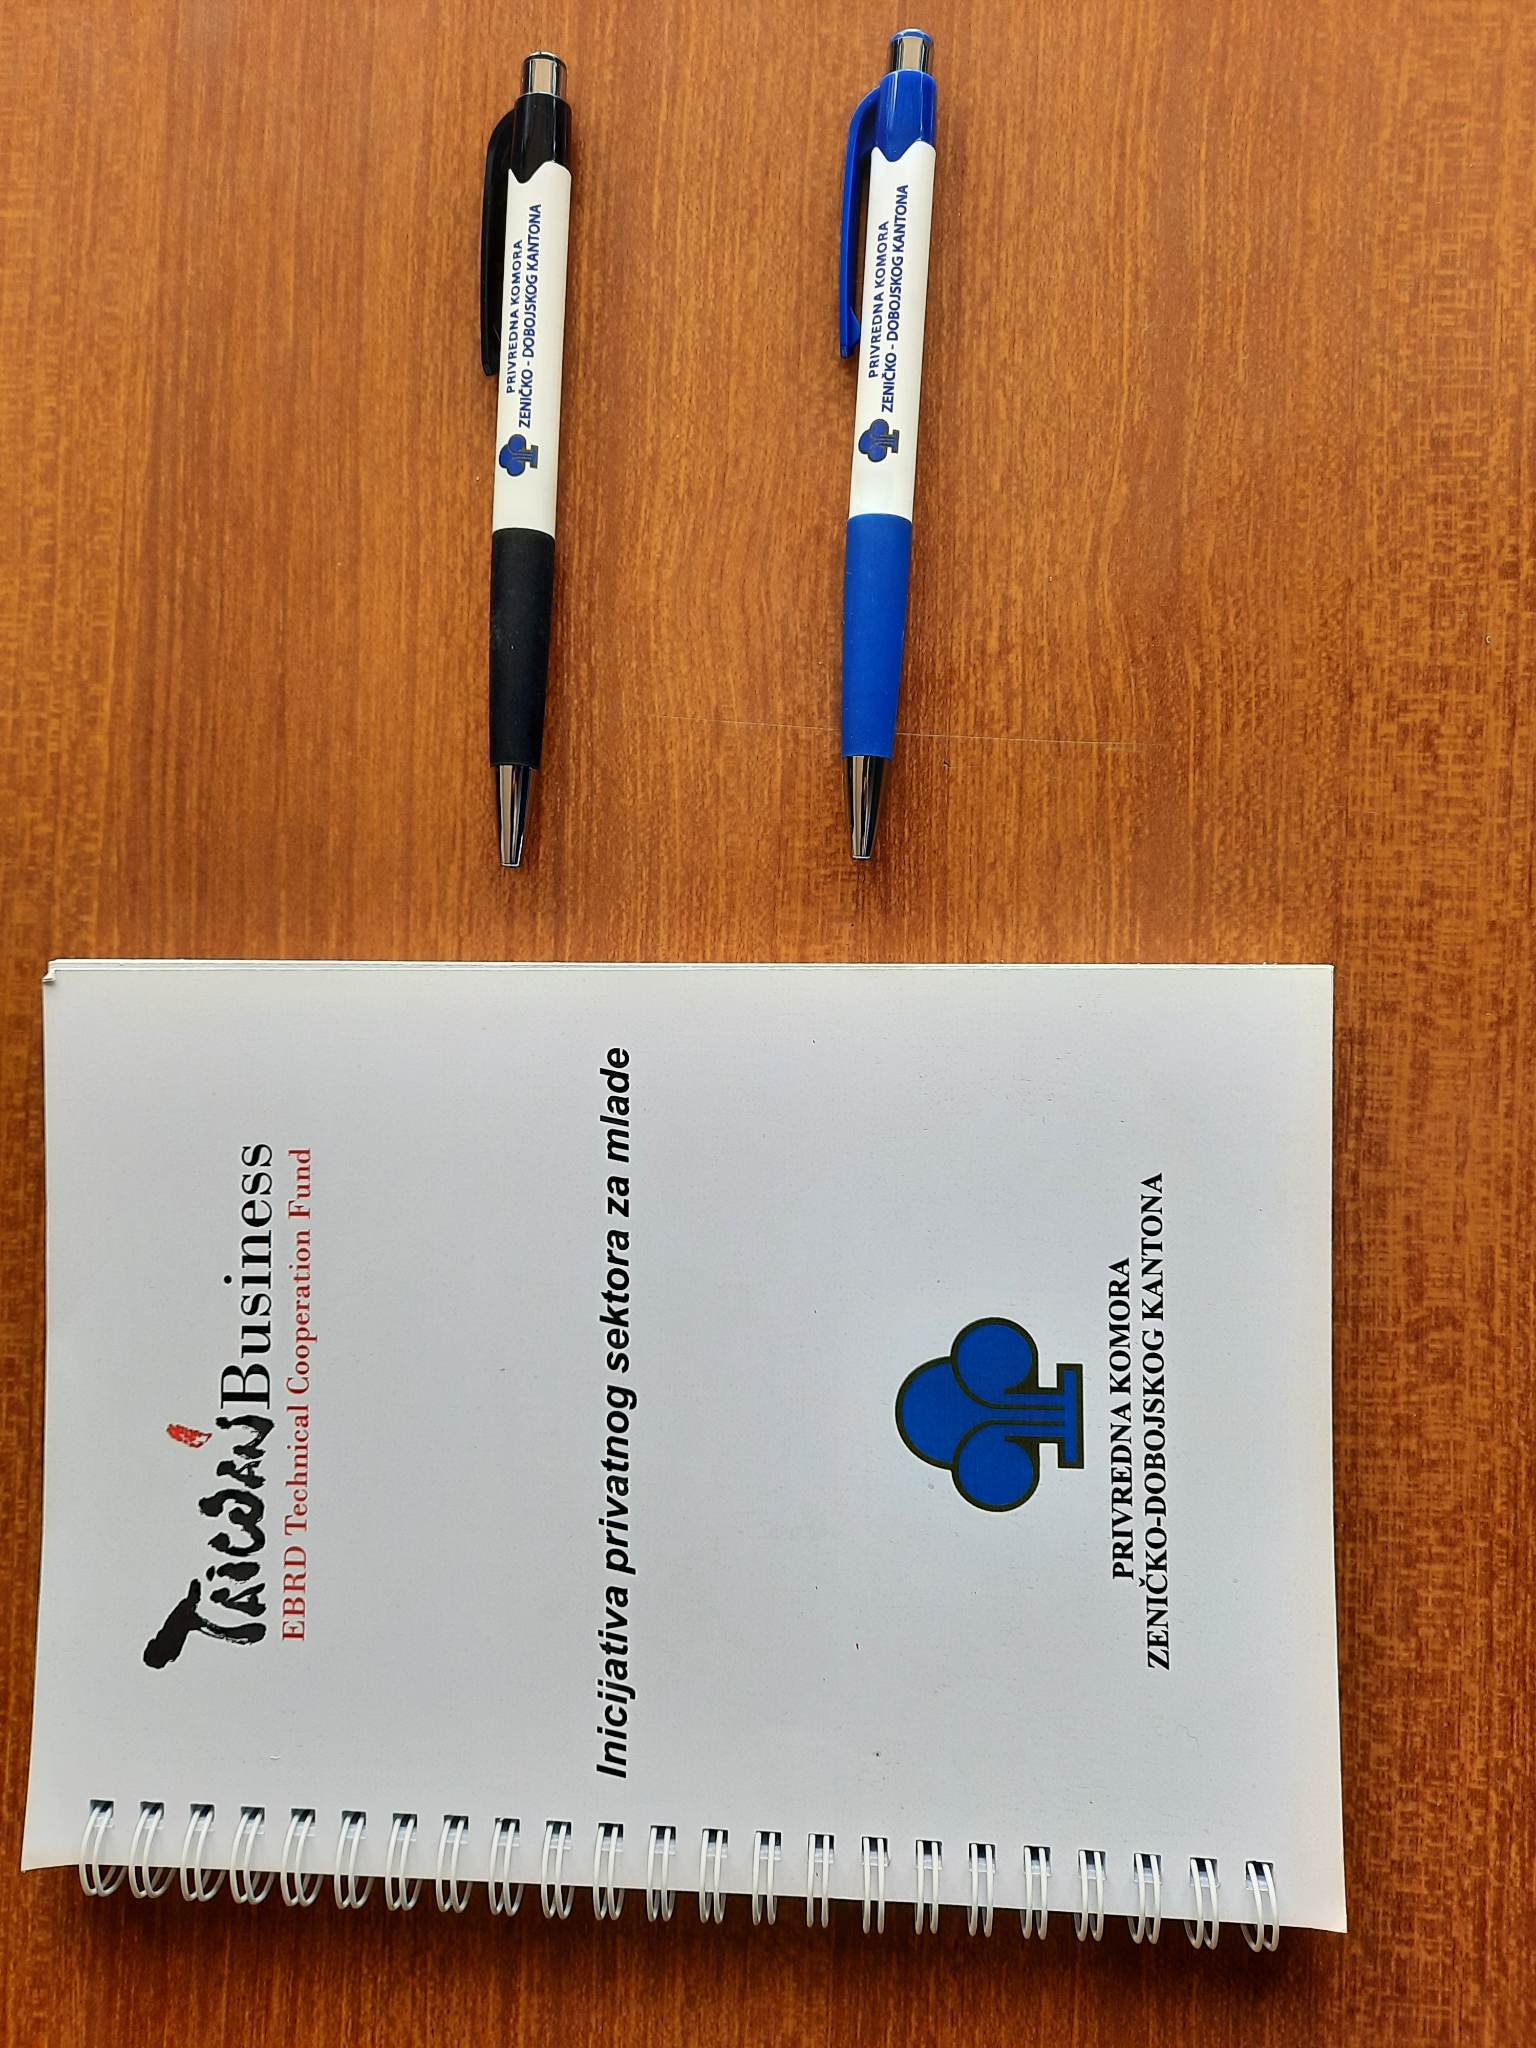 notepads and pens with the logo_1